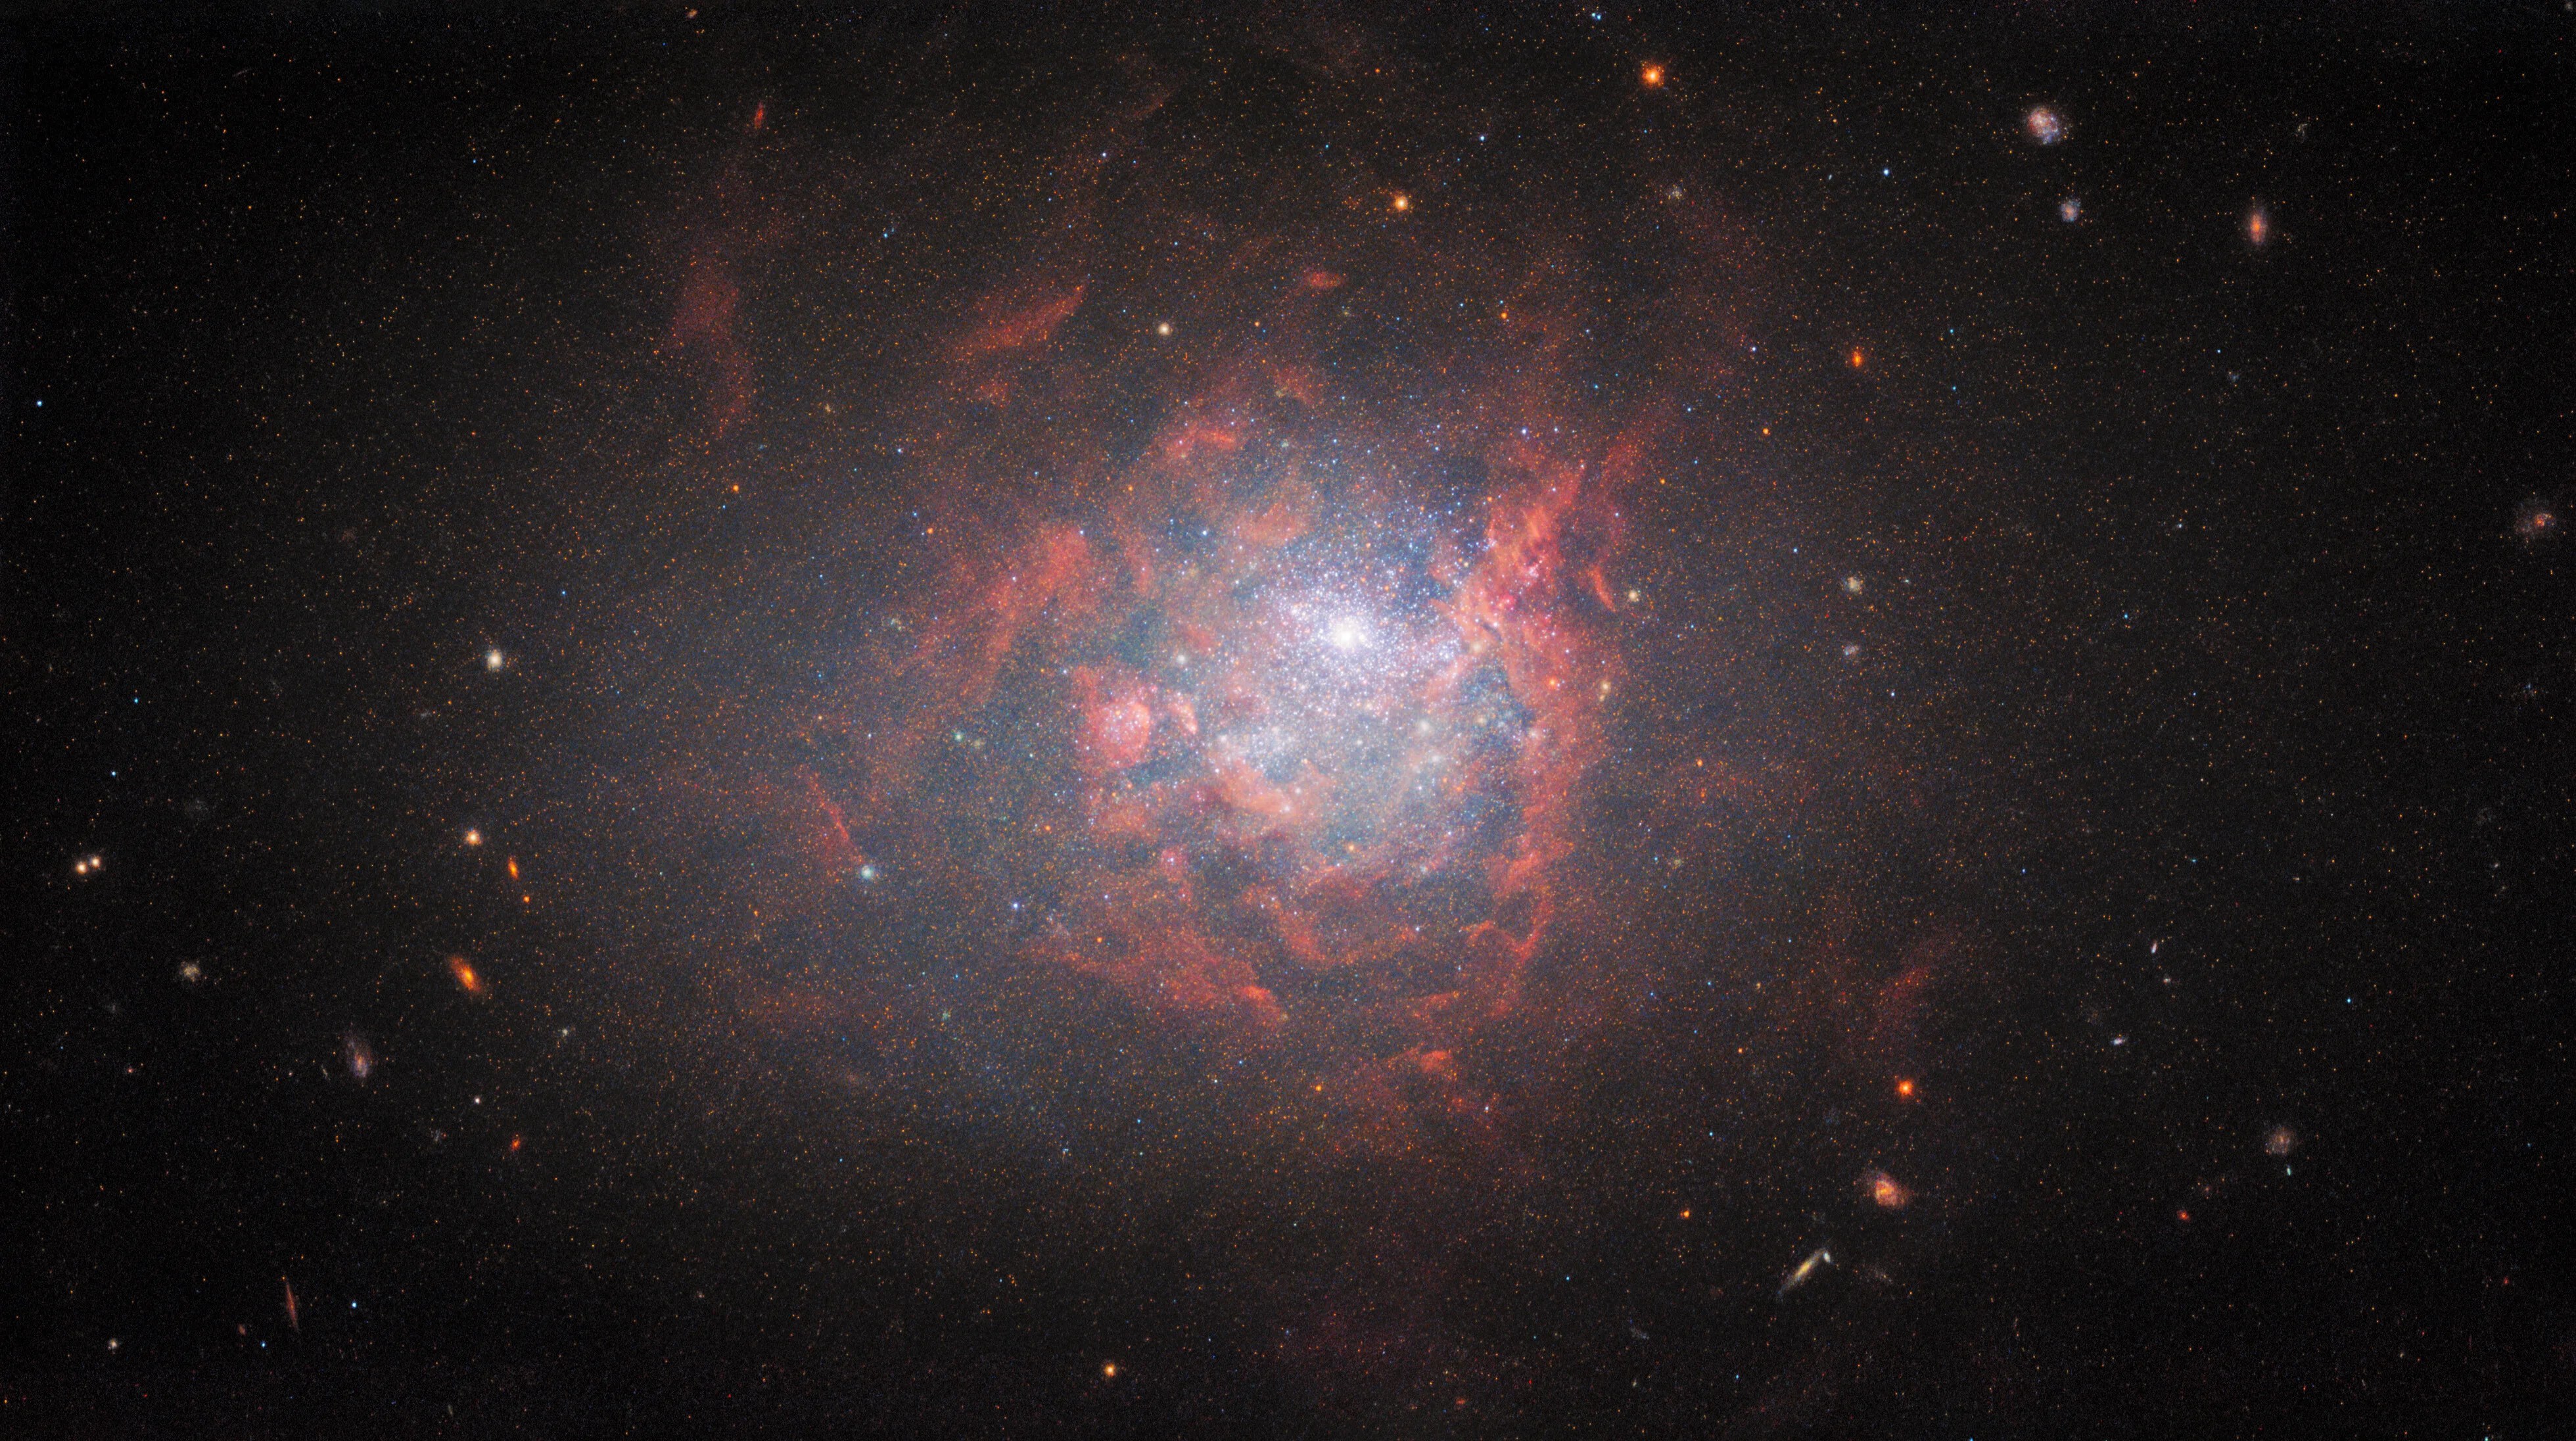 Bright-white star-filled center of the image/galaxy surrounded by billowing reddish clouds, distant galaxies are visible along the periphery of the galaxy